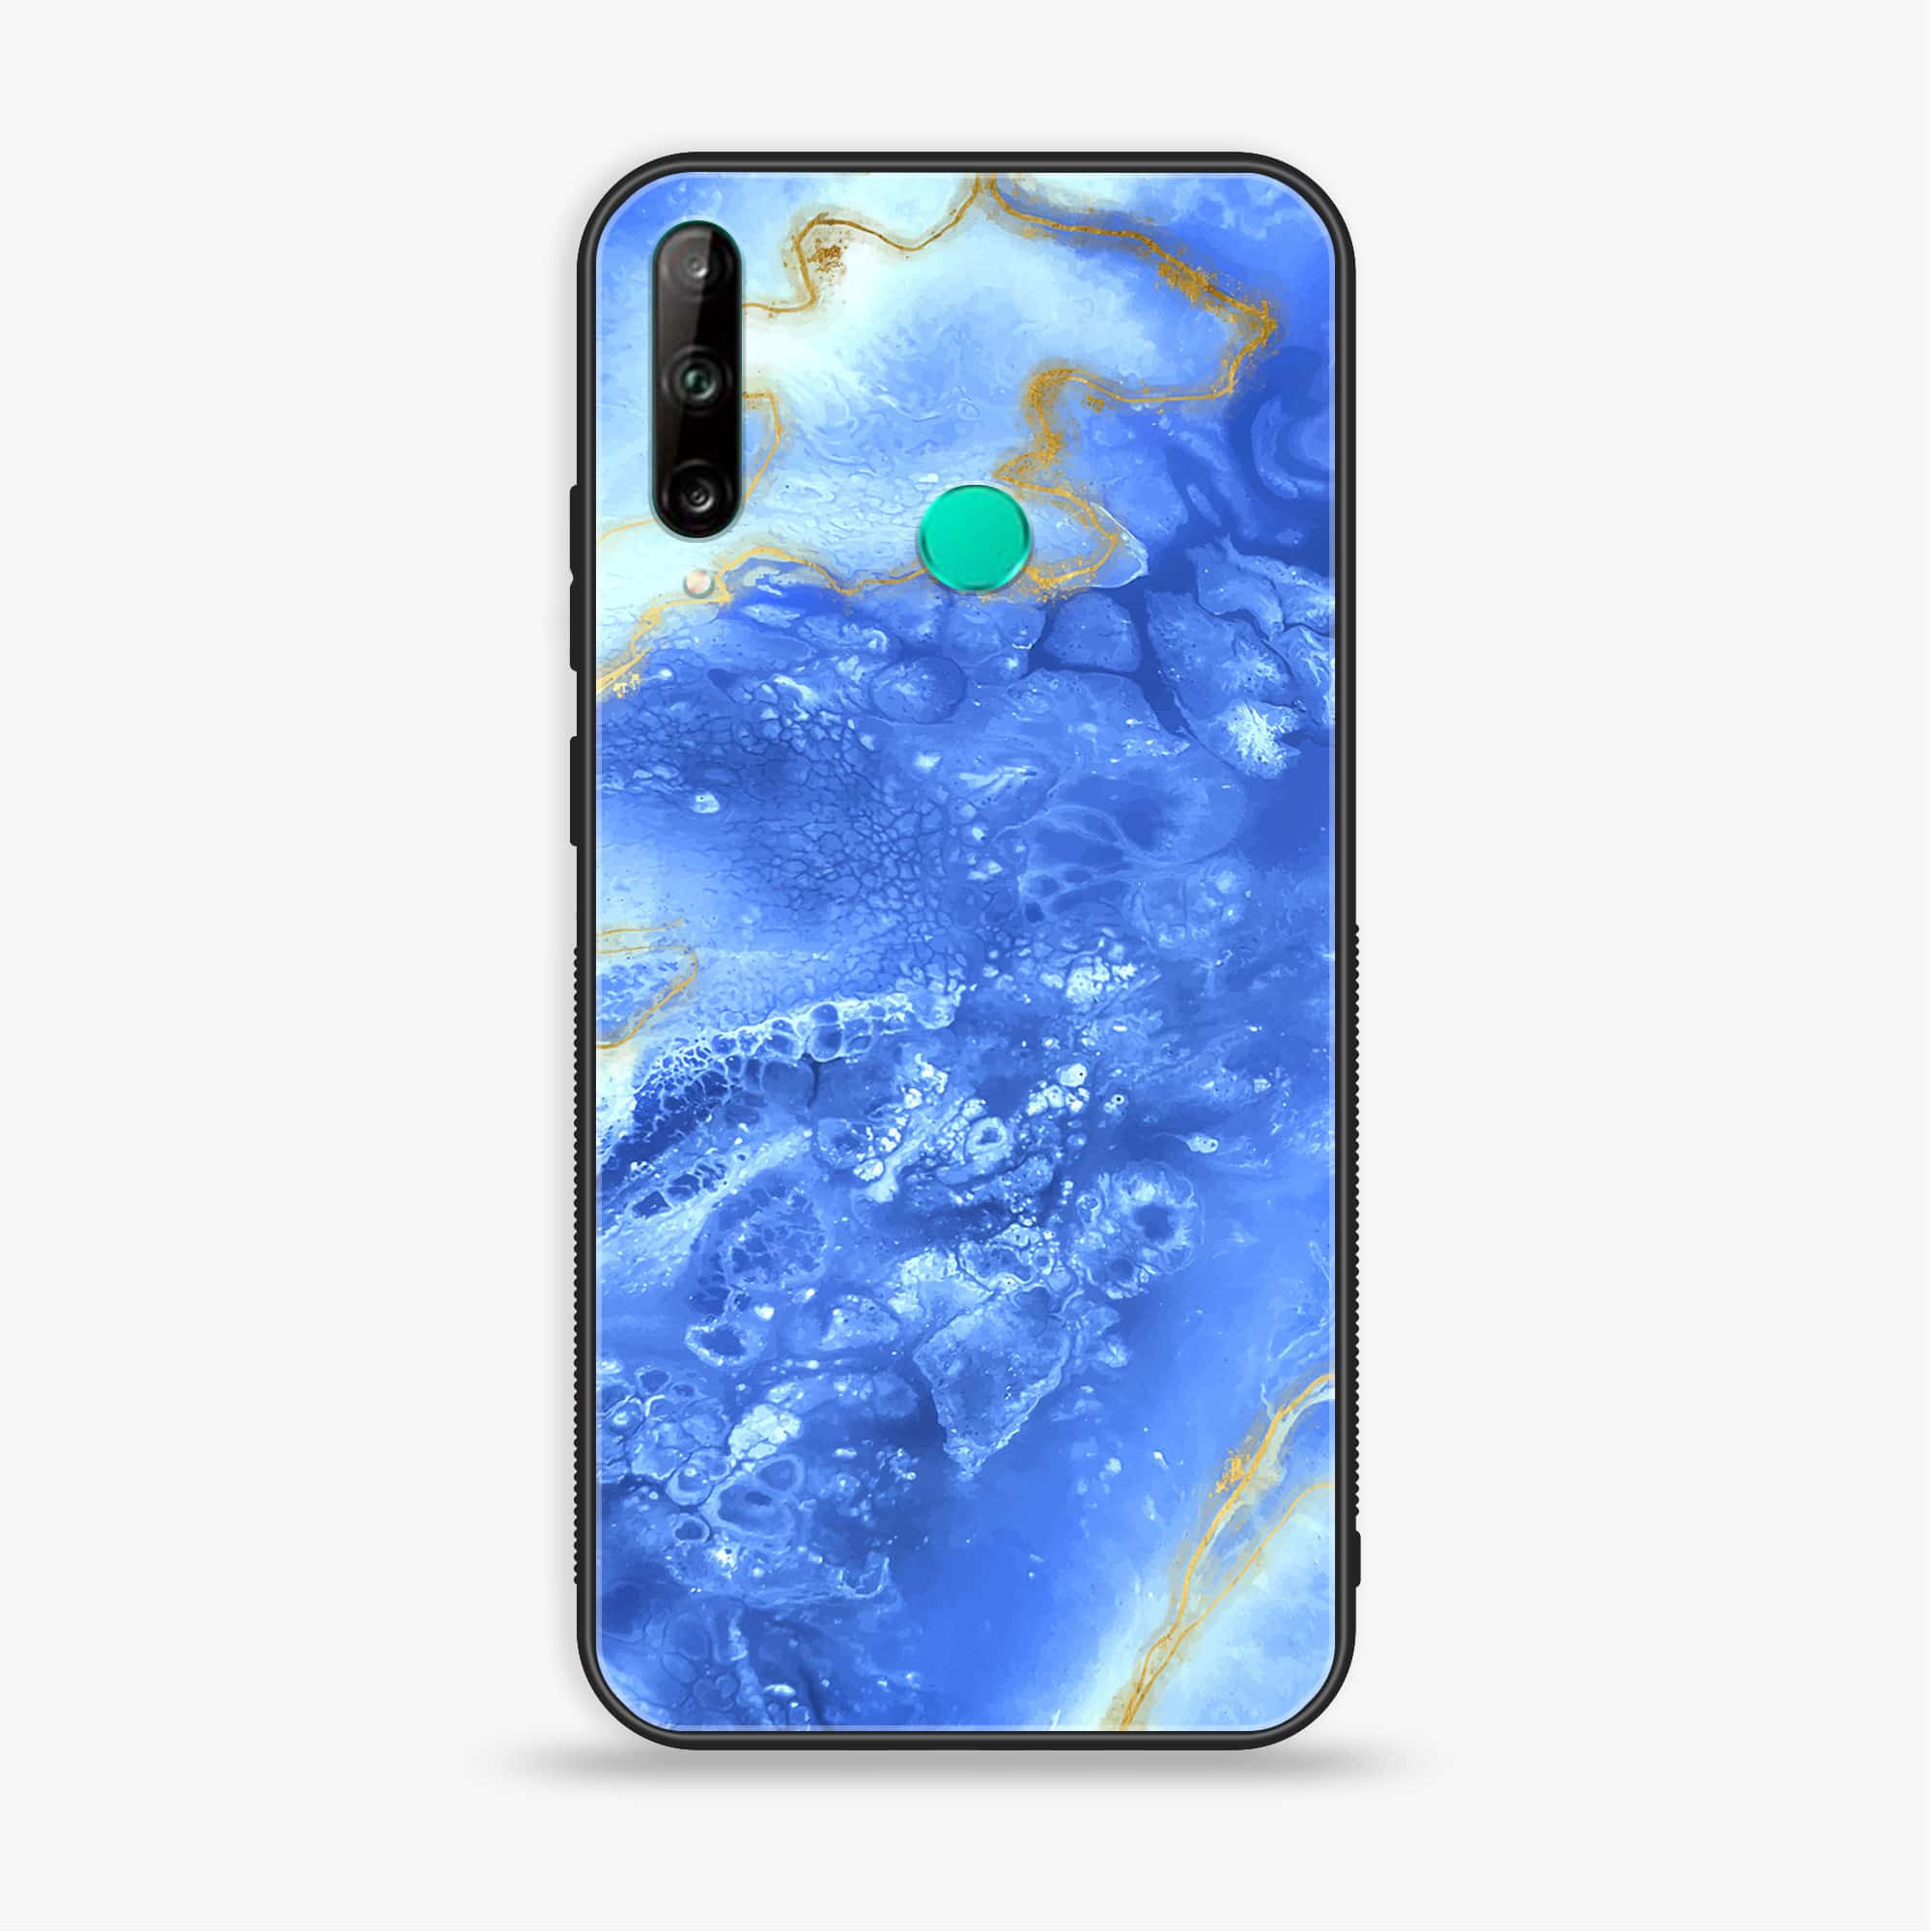 Huawei Y7p - Blue Marble Series V 2.0 - Premium Printed Glass soft Bumper shock Proof Case